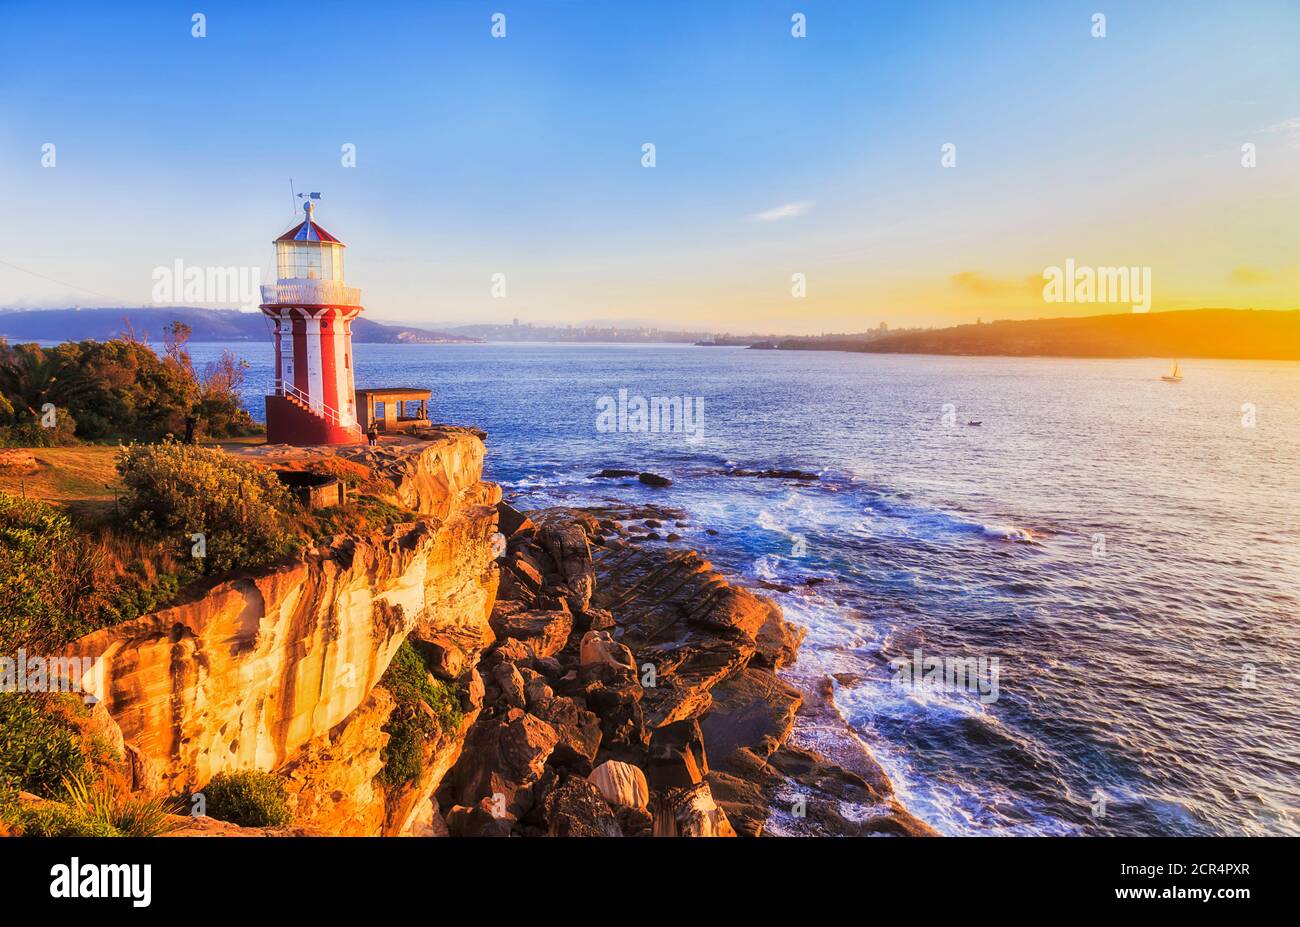 Warm rising sun light on HOrnby lighthouse and sandstone cliffs at entrance to Sydney harbour. Stock Photo